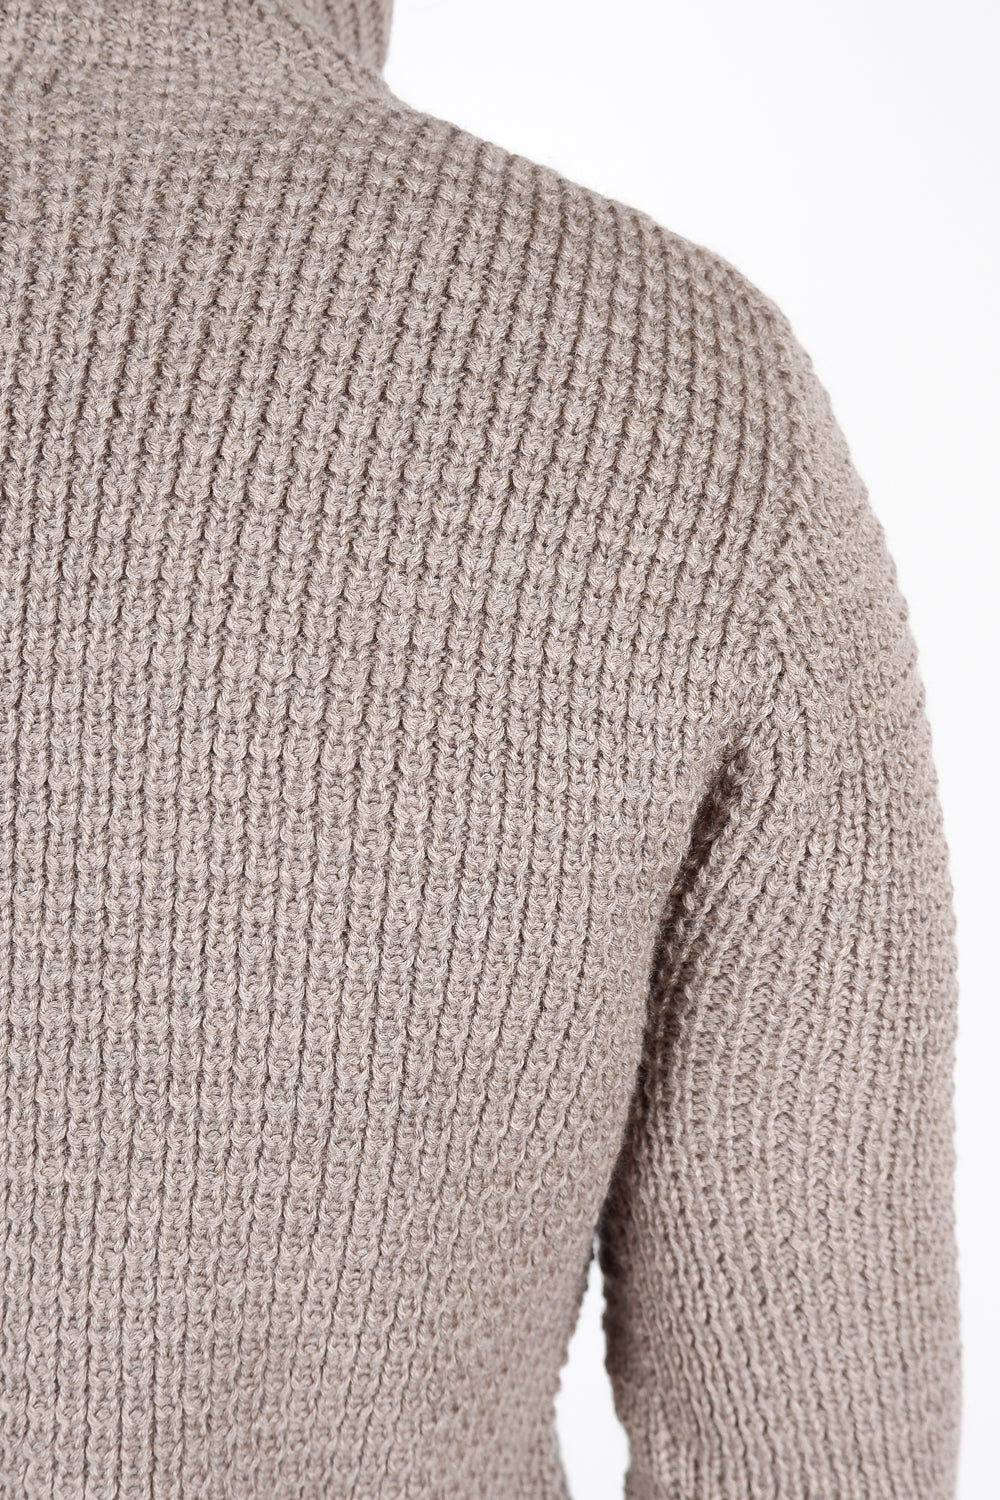 Buy the Hannes Roether Half Button Wool Sweater in Beige at Intro. Spend £50 for free UK delivery. Official stockists. We ship worldwide.